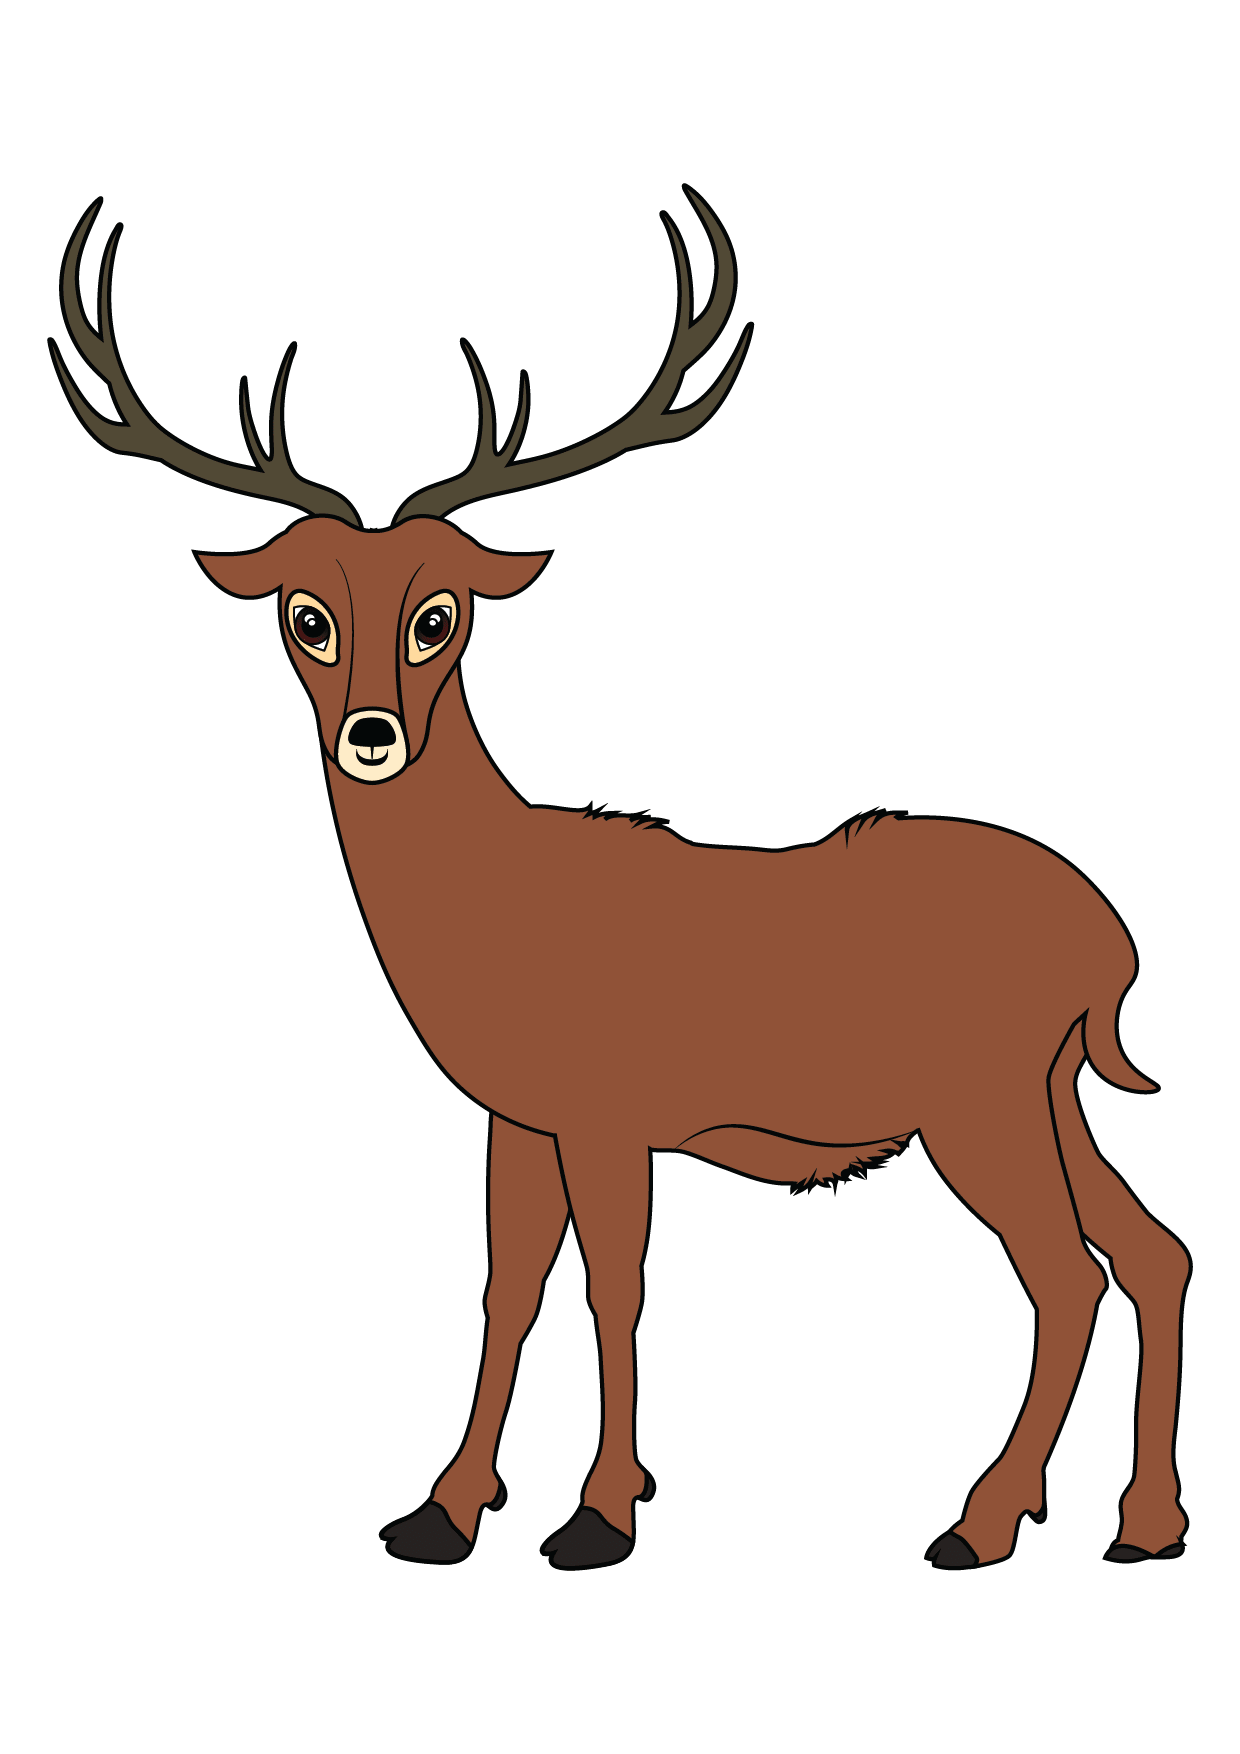 How to Draw A Deer Step by Step Printable